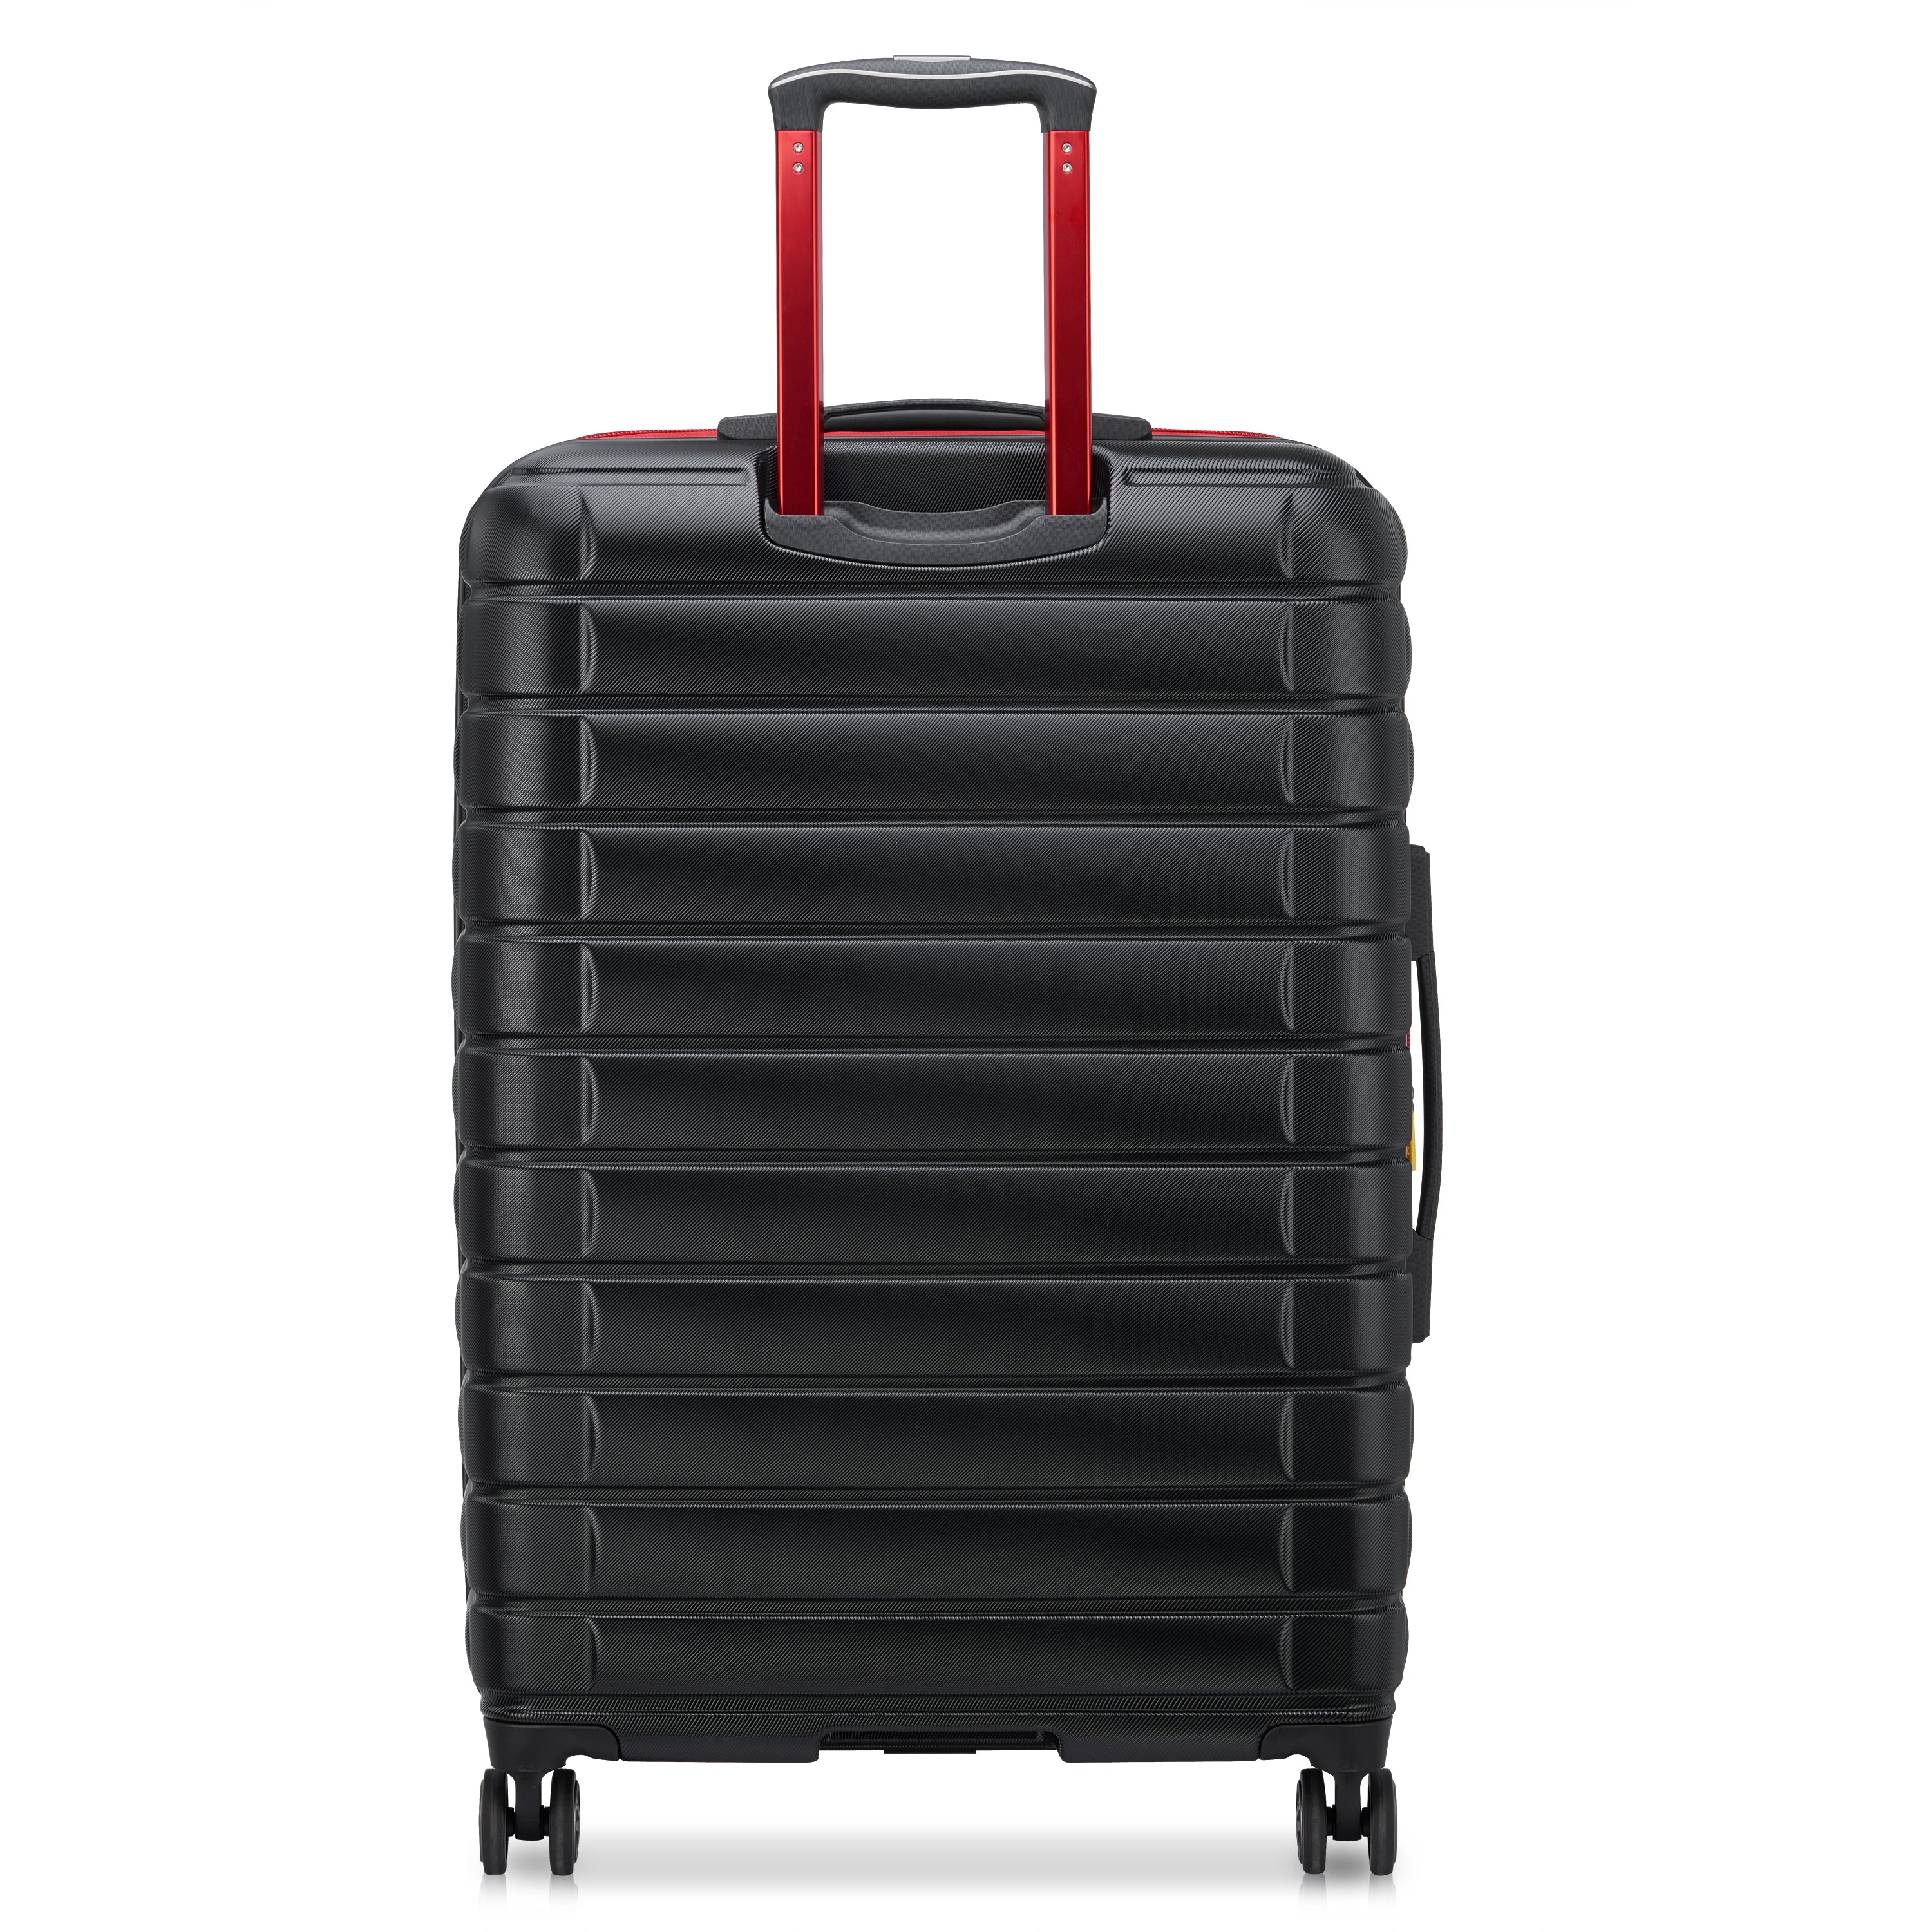 Delsey Shadow 5.0 Alfa Romeo F1 Collection 75cm Hardcase Expandable 4 Double Wheel Check - In Luggage Trolley Case Black - 00287882100F1